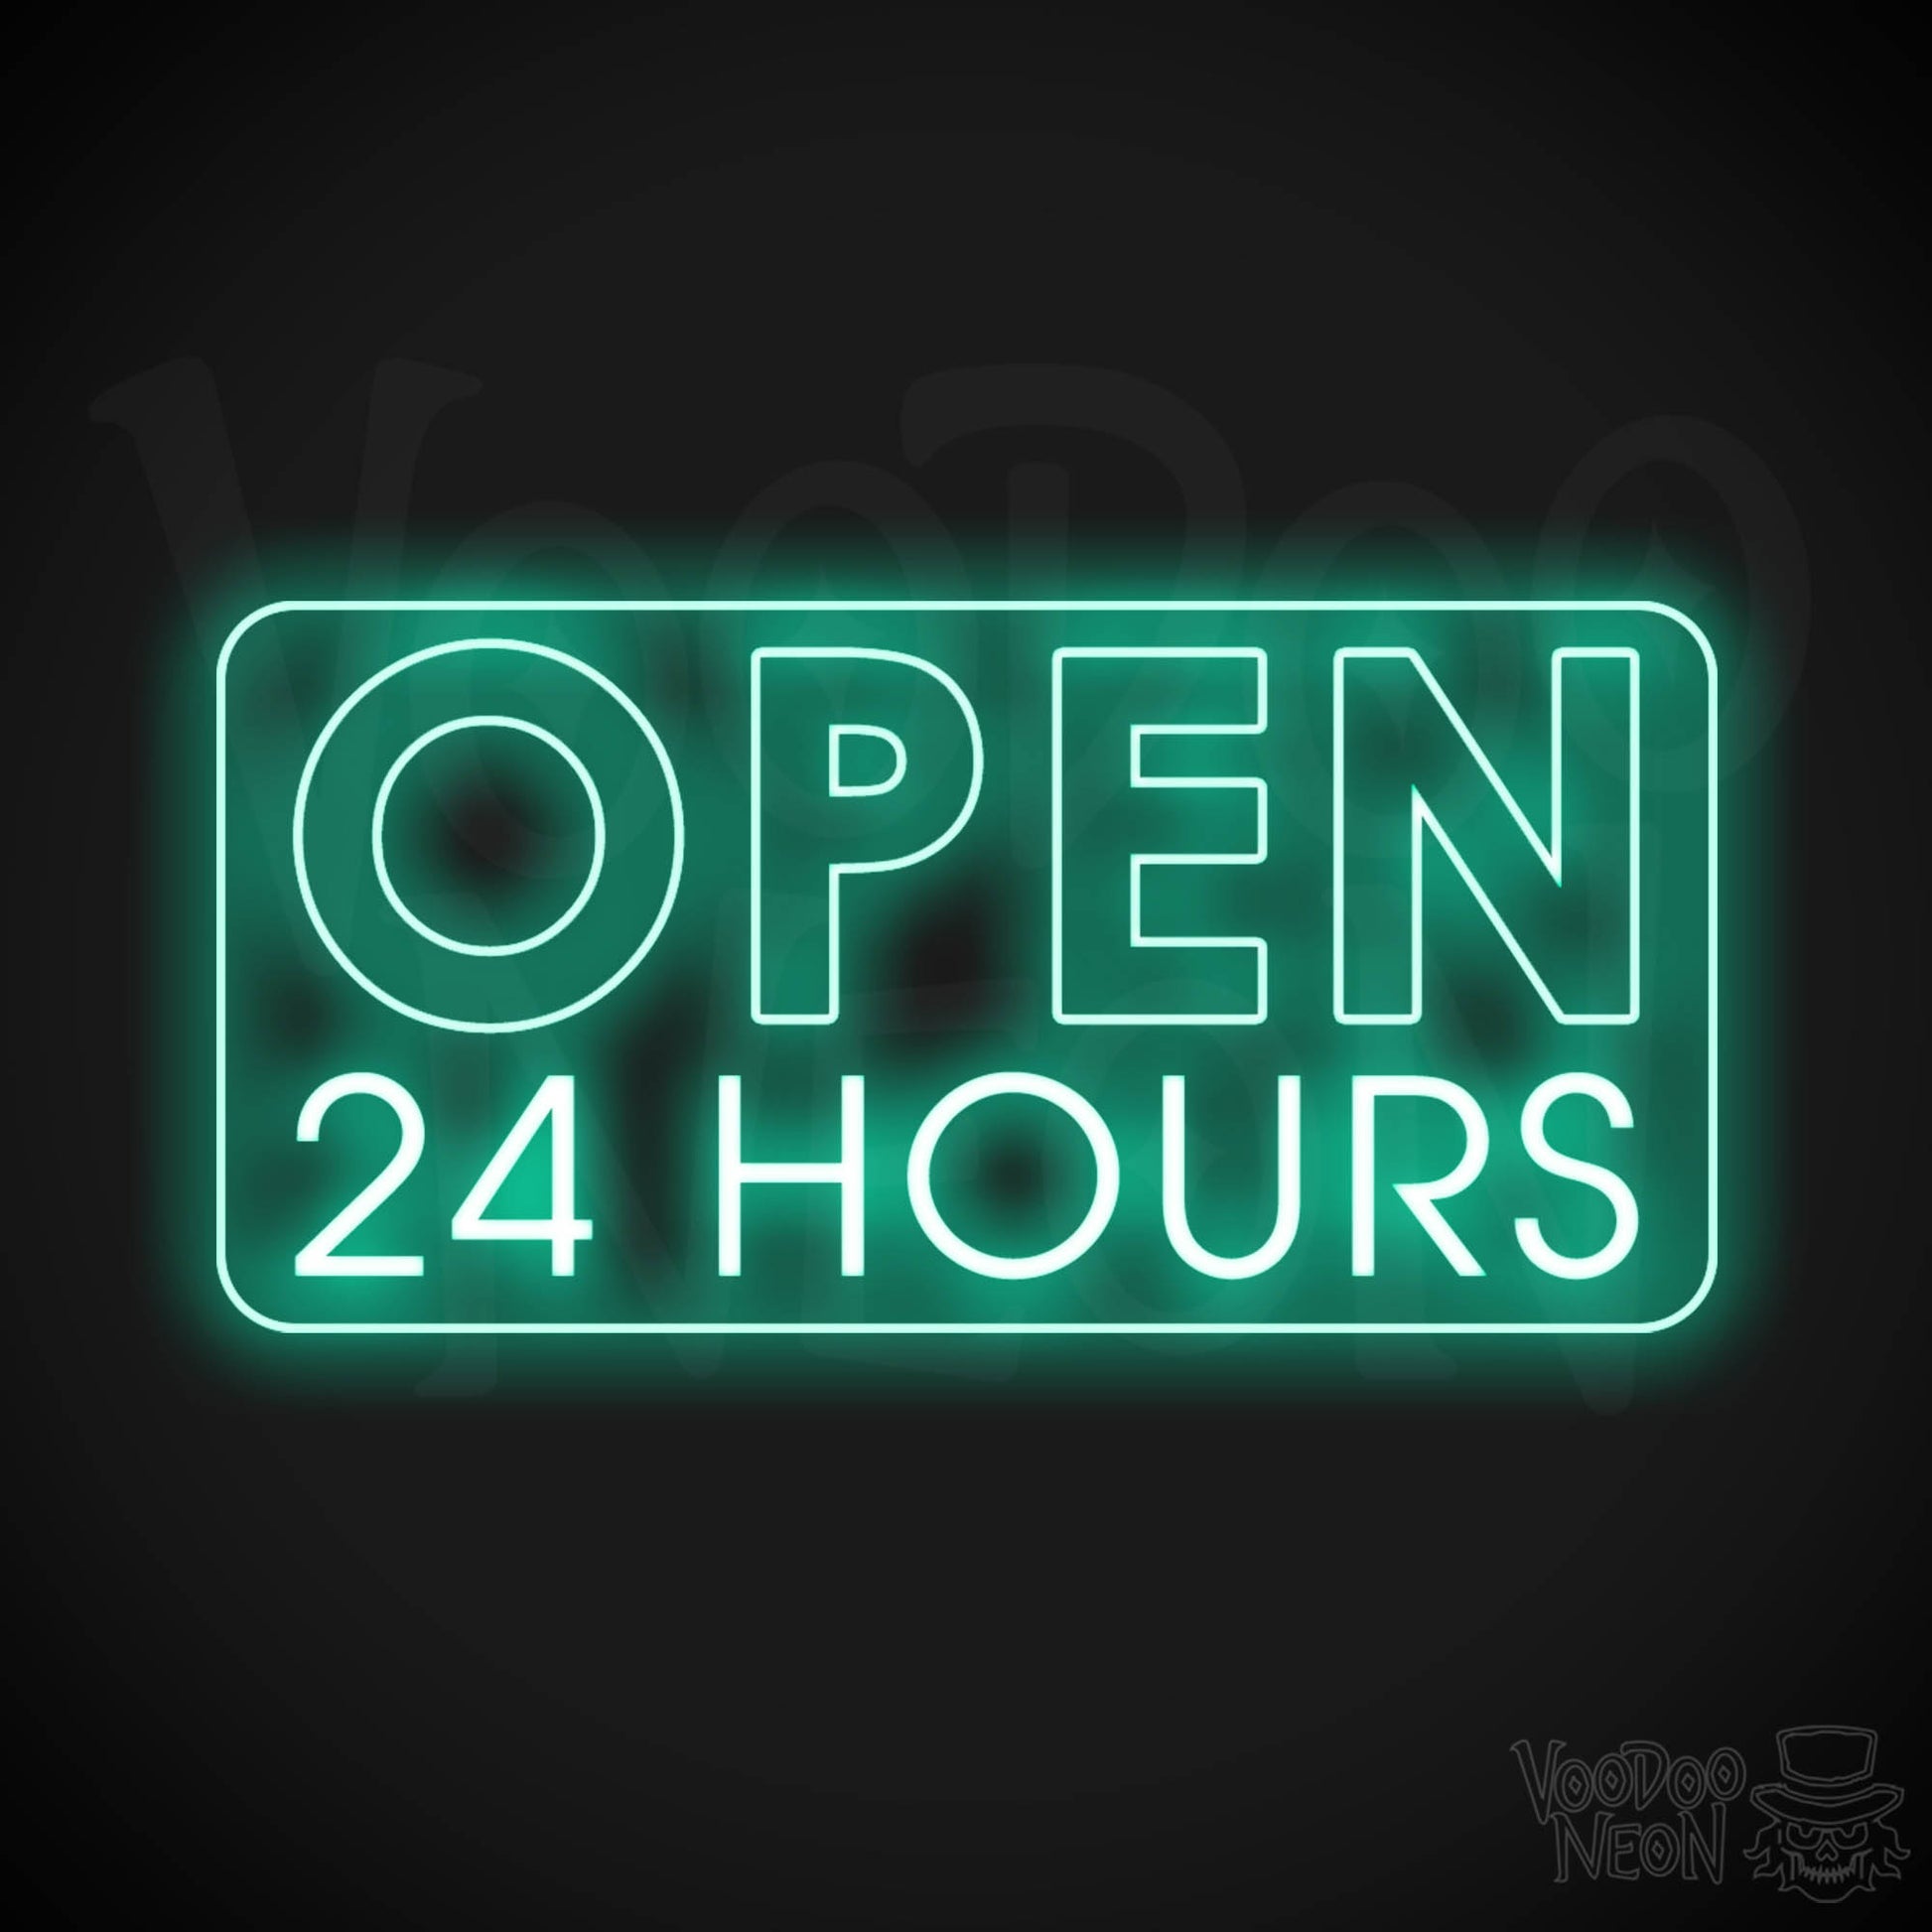 Open 24 Hours Neon Sign - Neon Open 24 Hours Sign - Shop Signs - Color Light Green